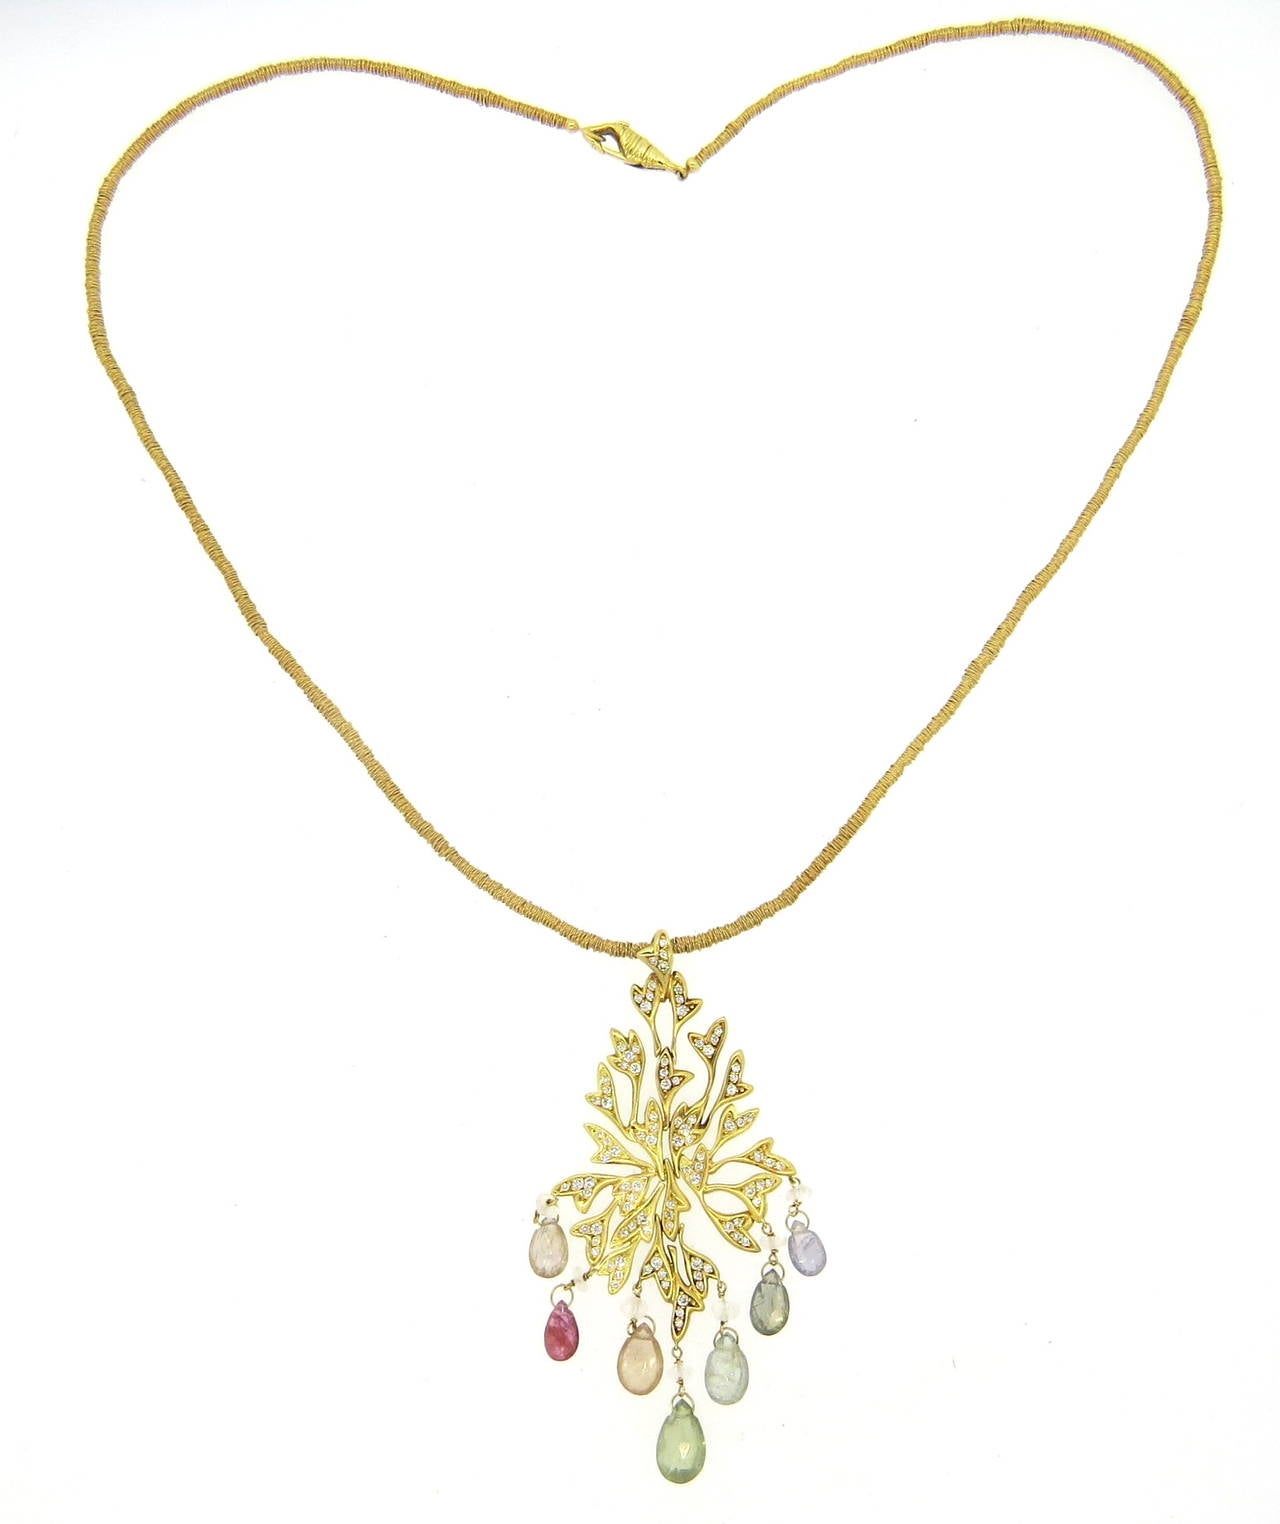 An 18k yellow gold pendant set with approximately 0.80ctw of H/VS-SI diamonds and multi color gemstone briolettes.  Crafted by H. Stern, the necklace measures 19.5